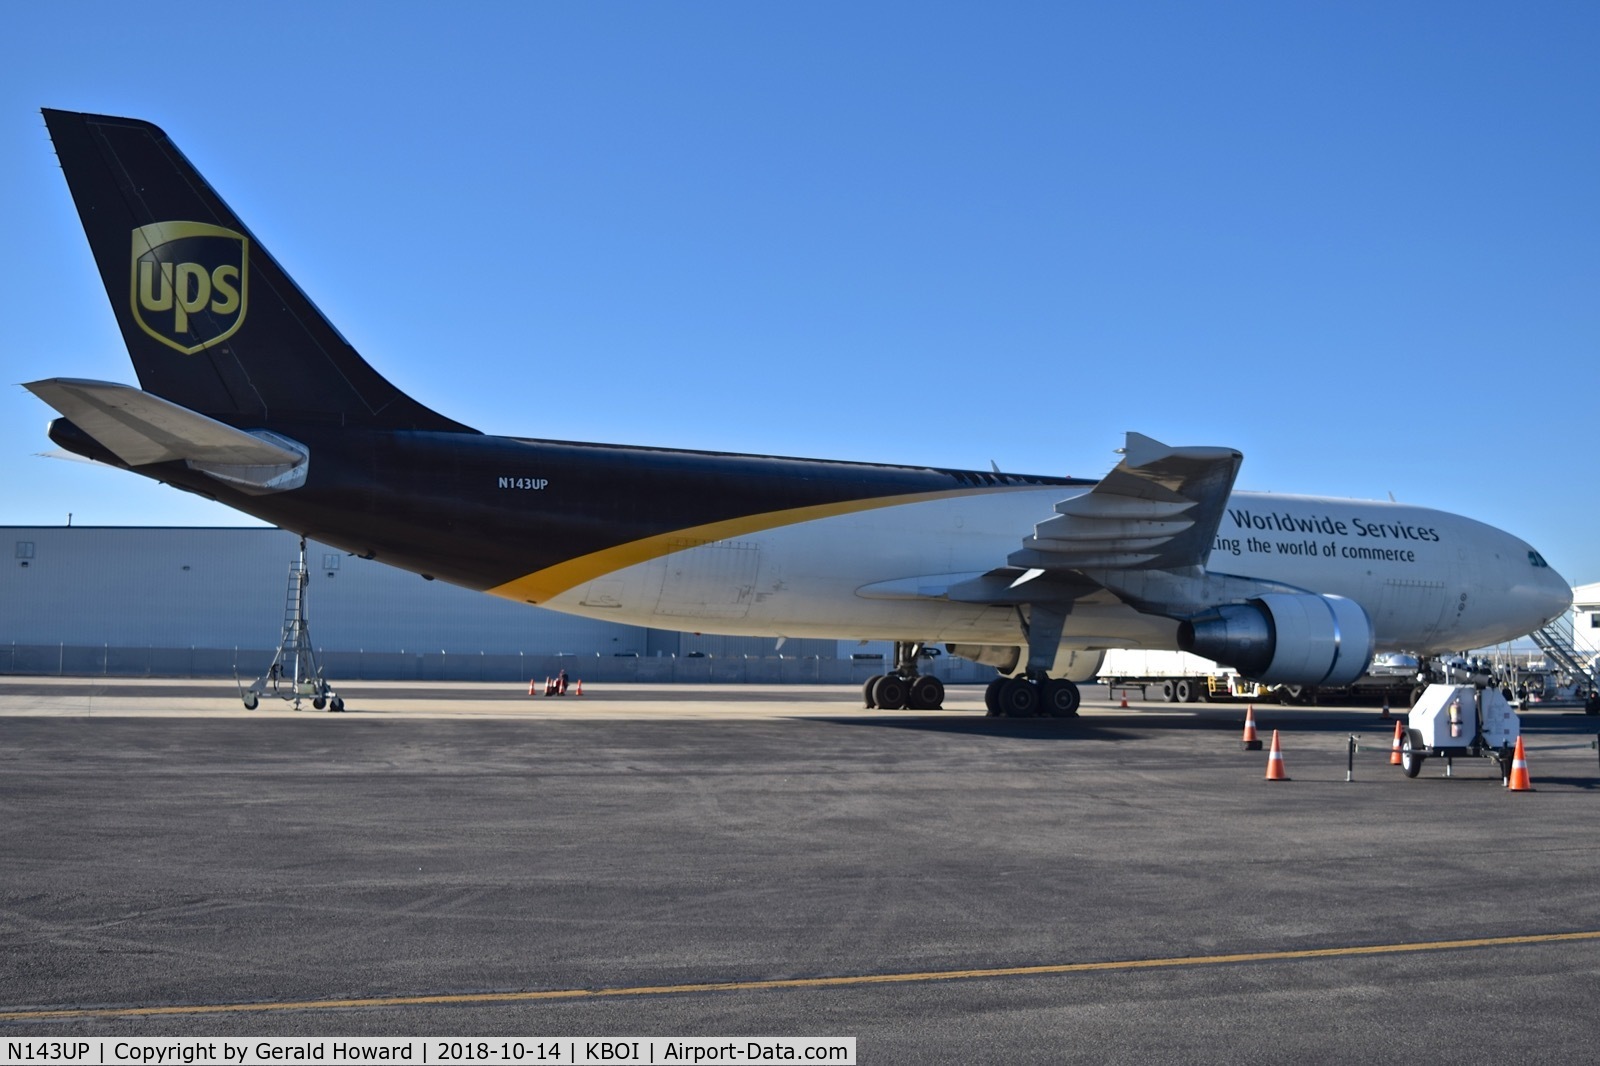 N143UP, 2002 Airbus A300F4-622R C/N 0826, Parked on the UPS ramp.